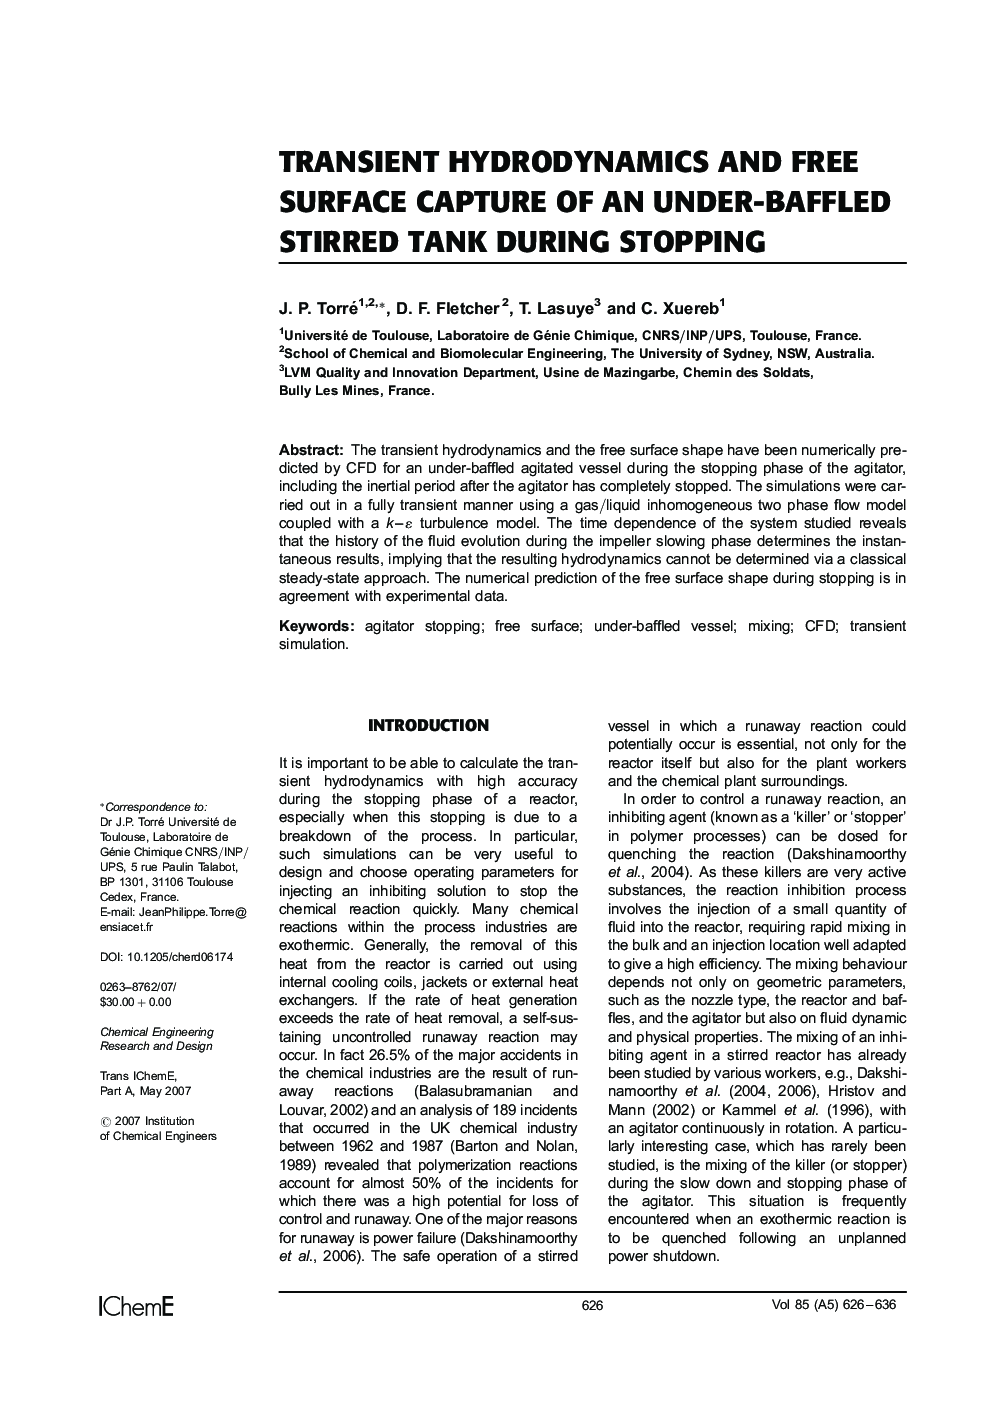 Transient Hydrodynamics and Free Surface Capture of an Under-Baffled Stirred Tank During Stopping